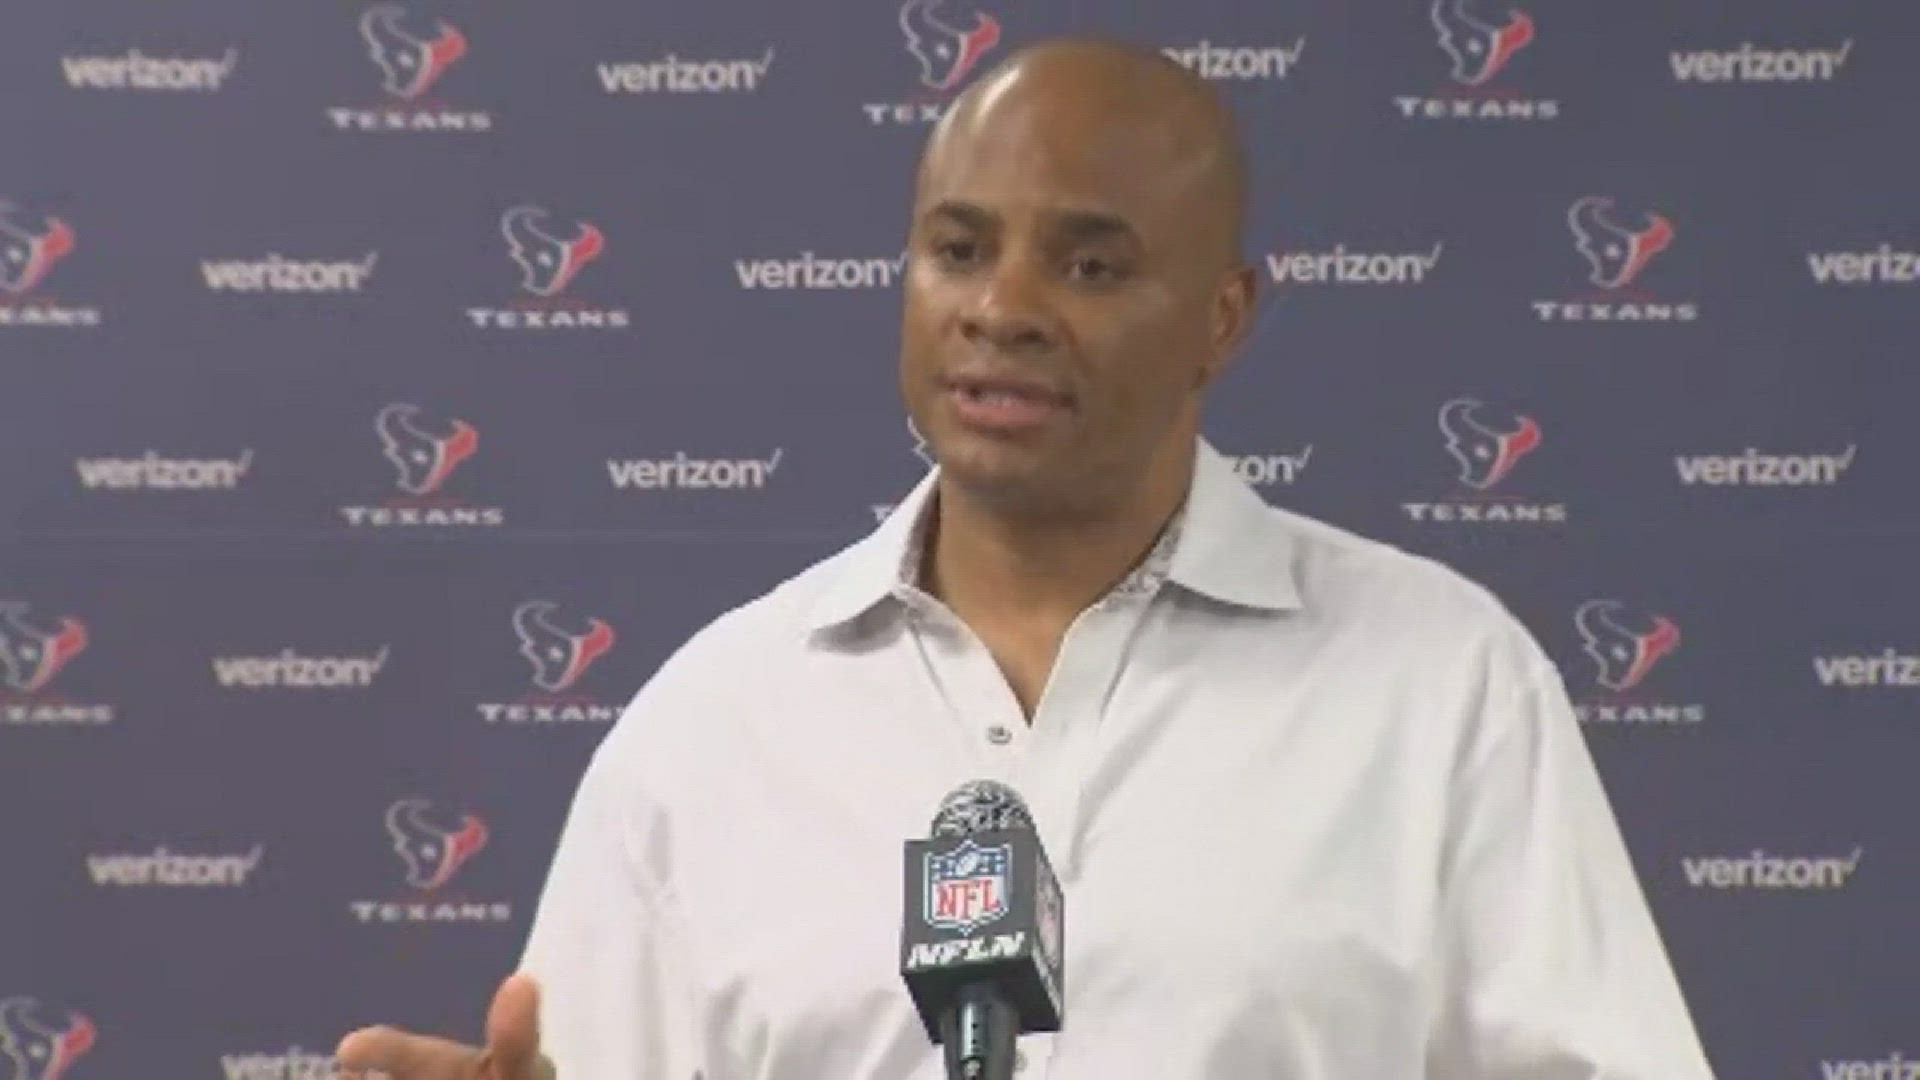 How does Houston Texans General Manager Rick Smith describe the draft process? Exhaustive.